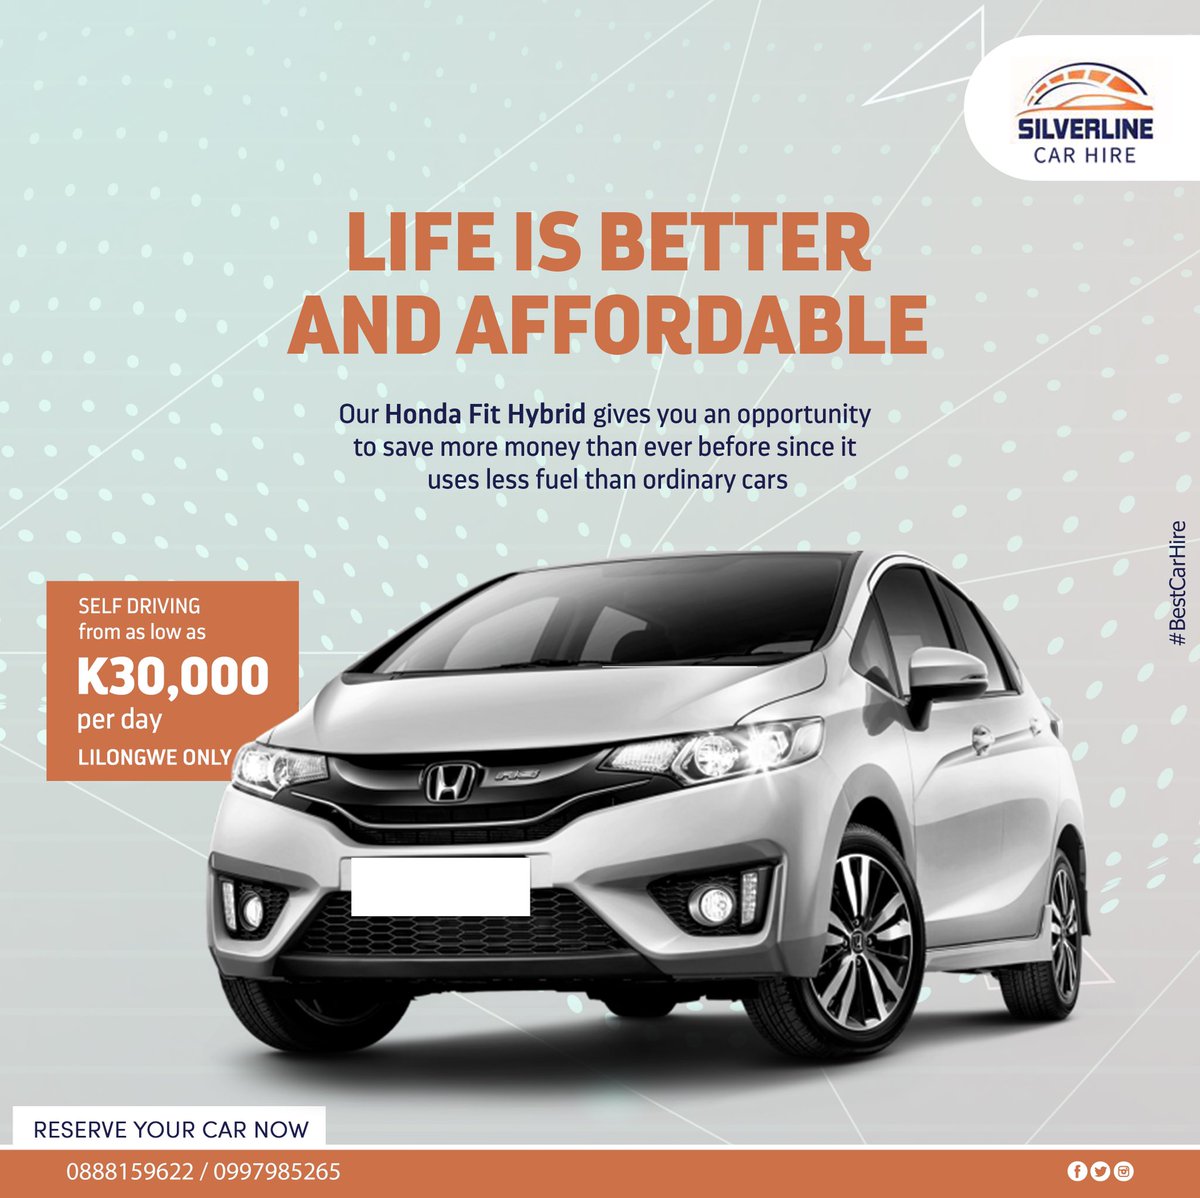 HONDA FIT HYBRID FOR HIRE 
Call / App 0888159622 or 0997985265 for reservations. Only at Silverline Car Hire / Lilongwe. 

#forhire #carhire #hybridengine #lowfuelconsumption 
#easydrive #hondafit #hondafitclub